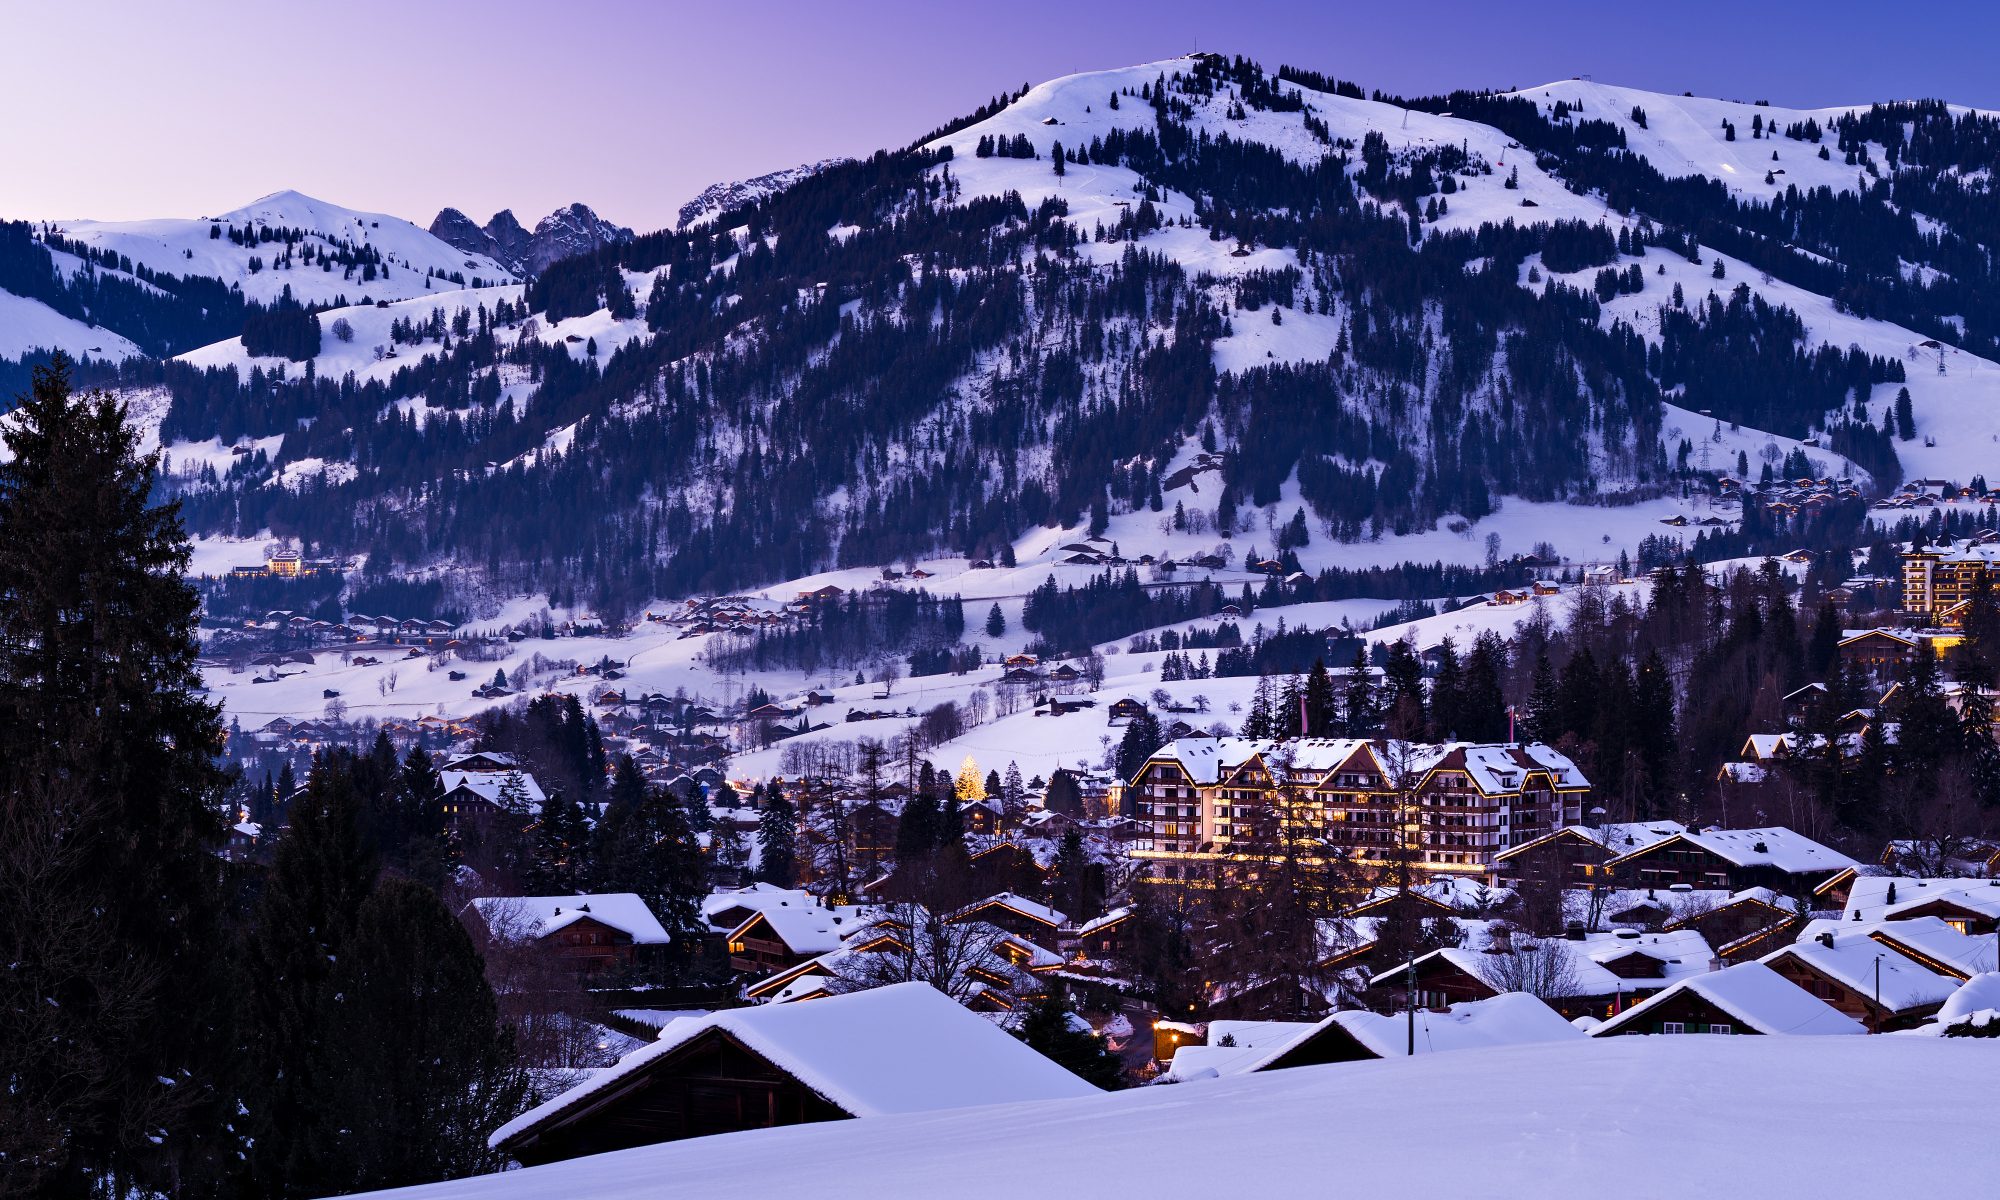 Gstaad in winter. Quarantine Rules Removed in Switzerland as of 4 December